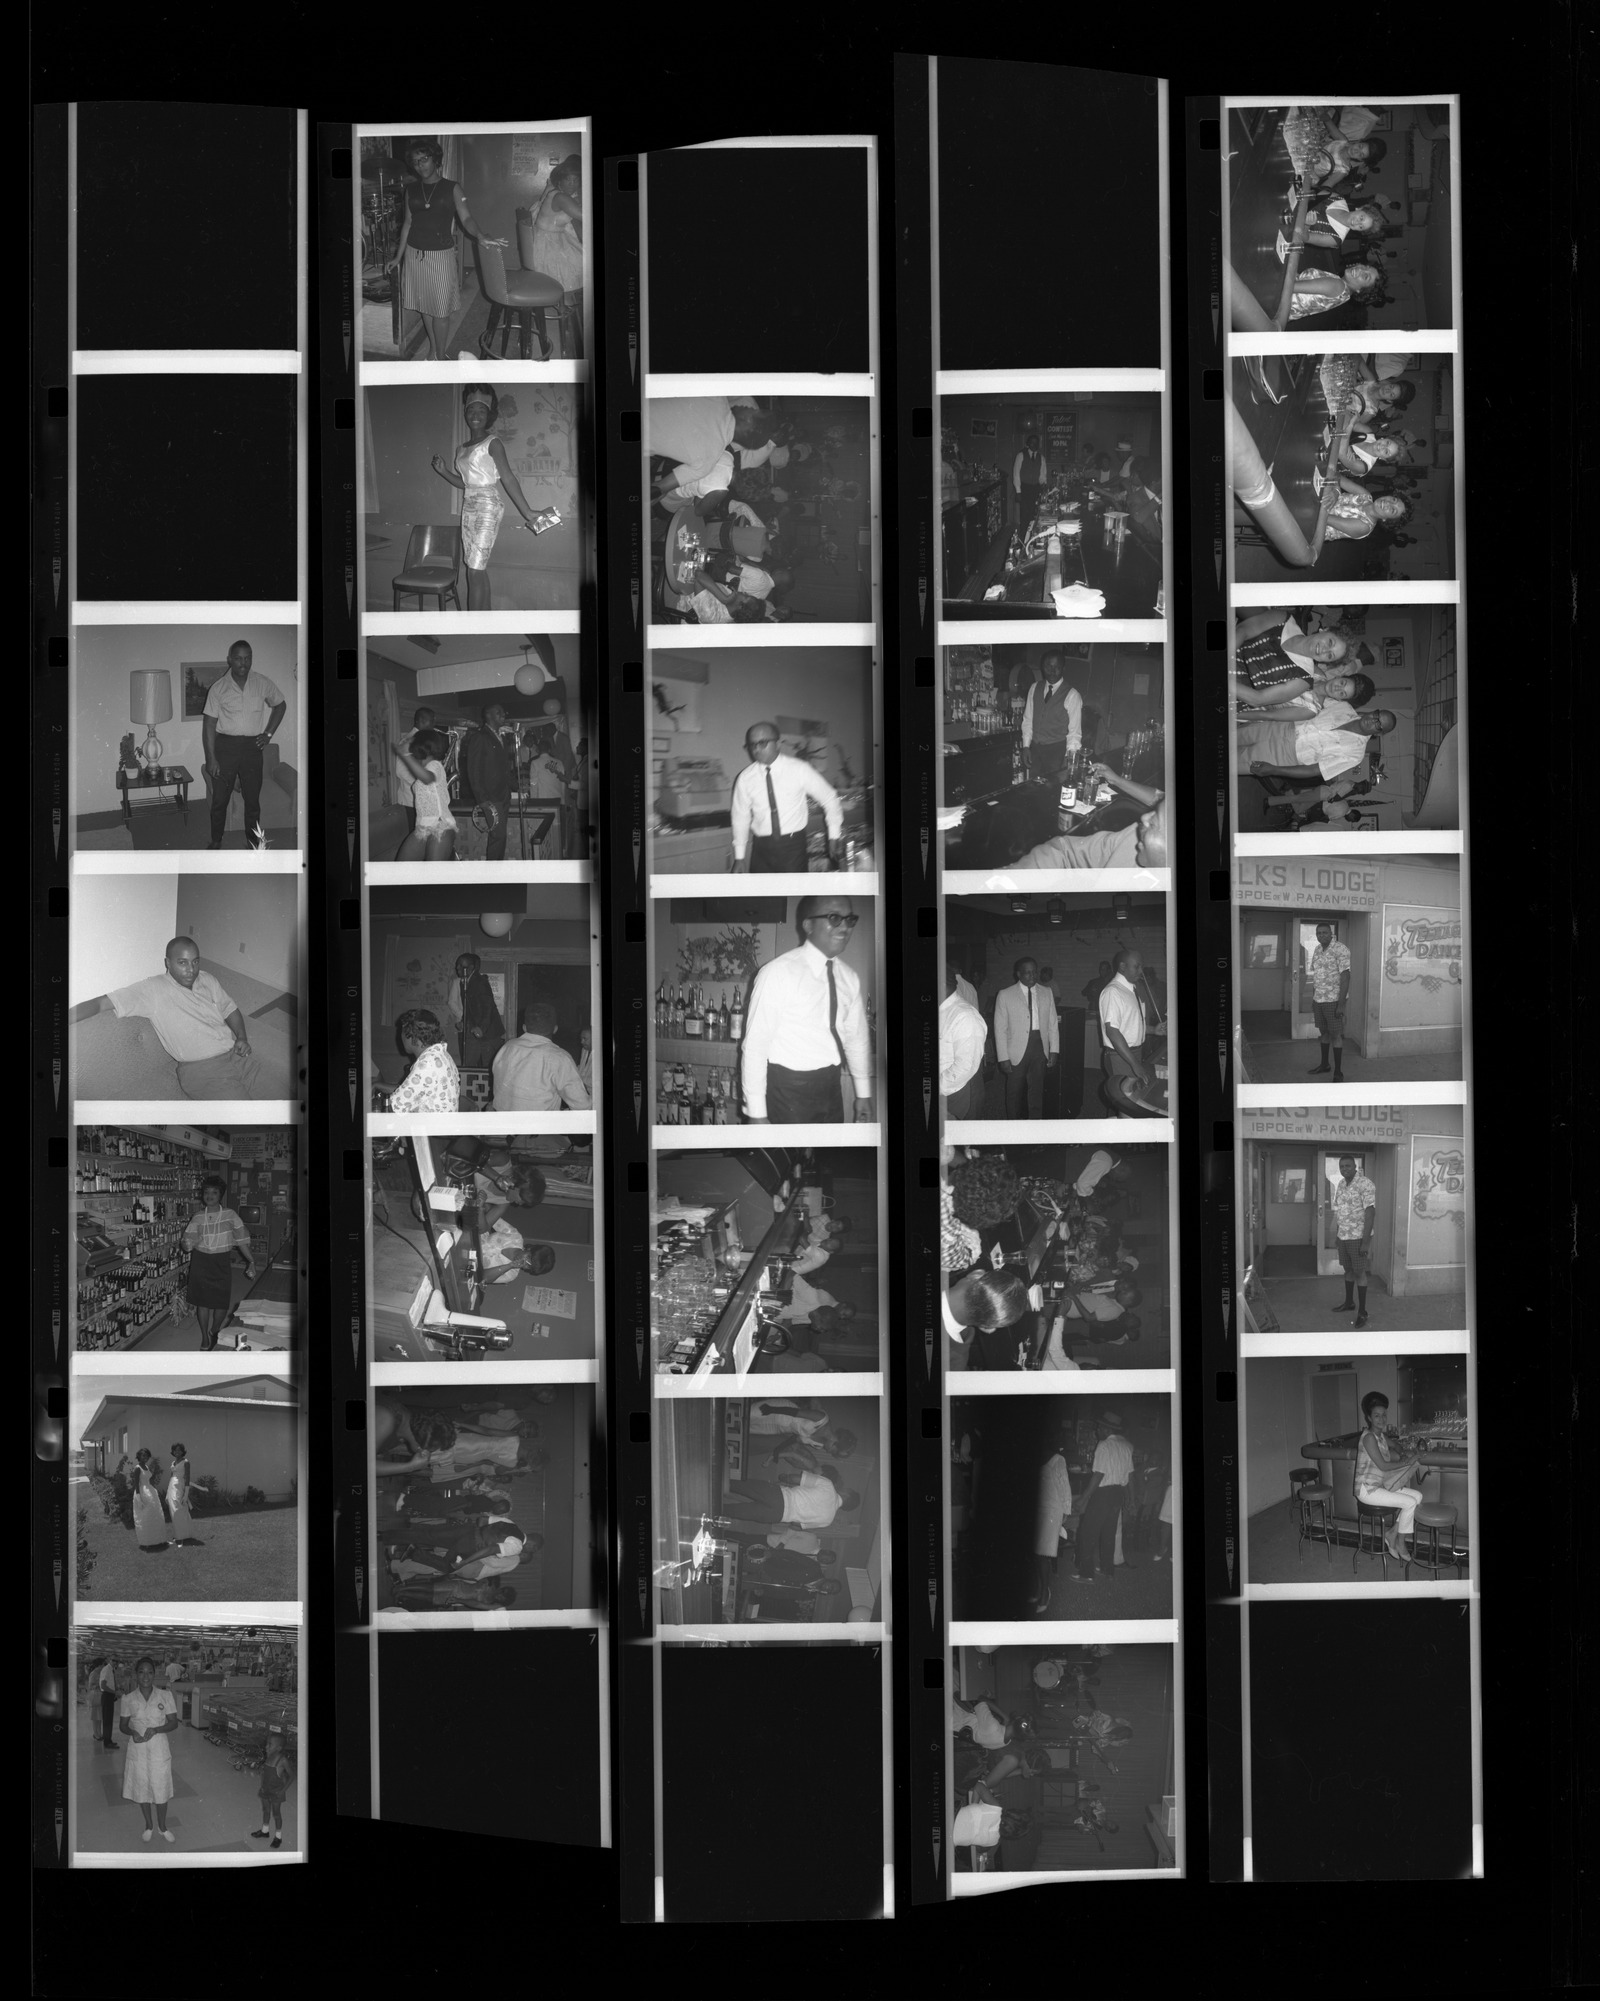 Set of negatives by Clinton Wright including Elks Lodge, bar interiors, and Grant Sawyer's arrival at airport, 1966, page 1